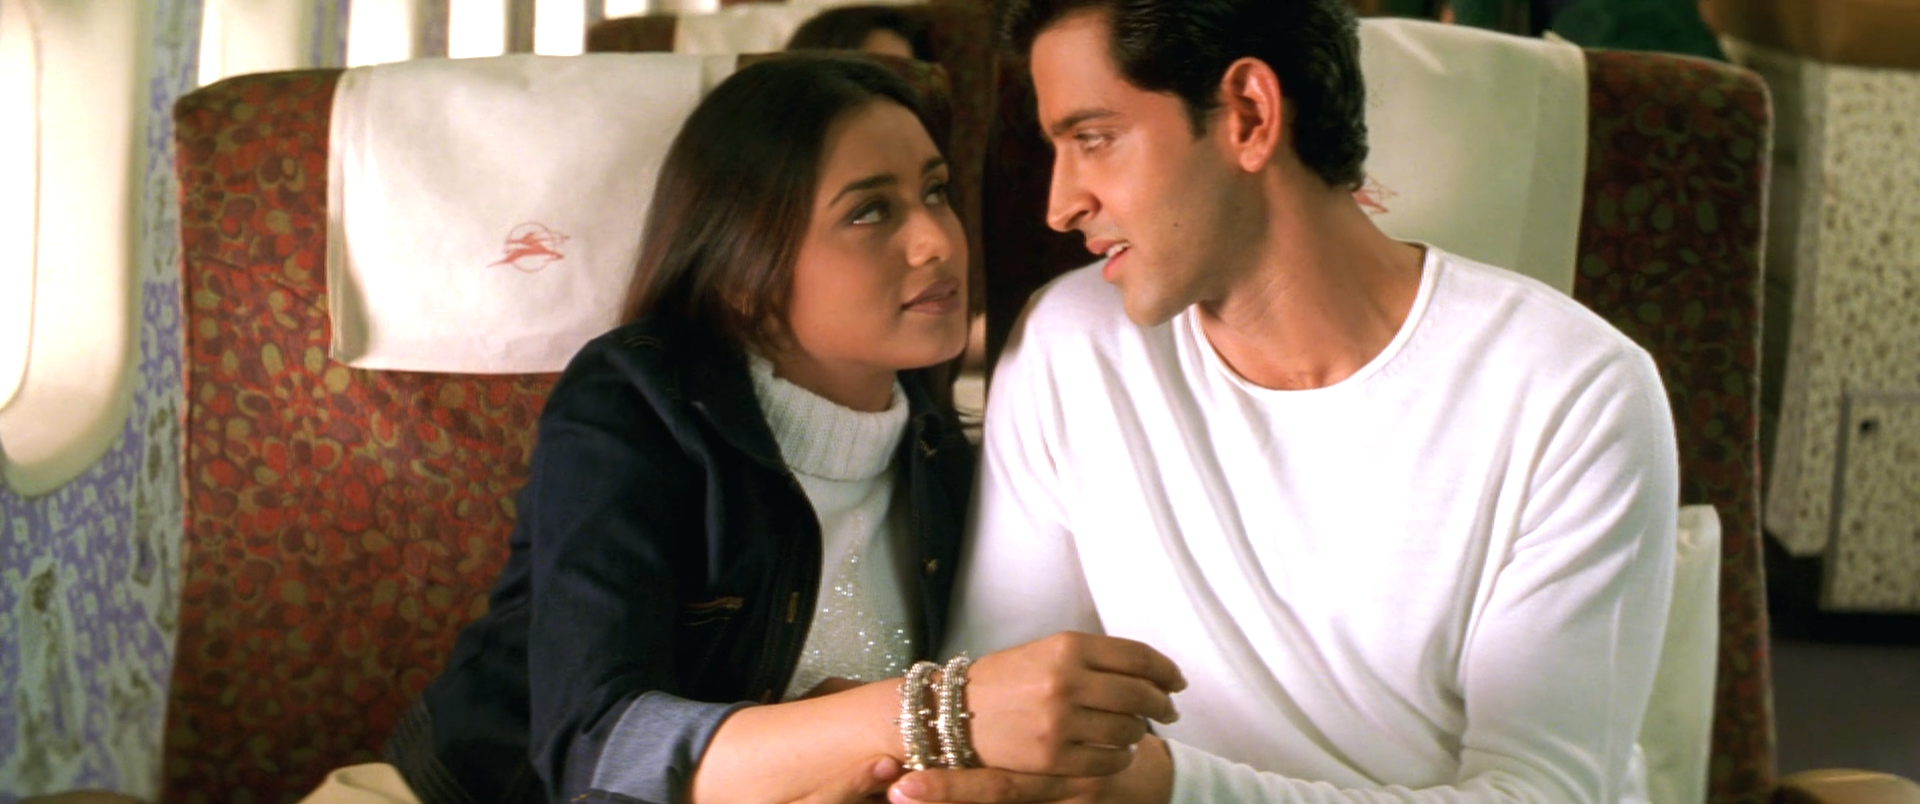 Hrithik Roshan and Rani Mukherji looking at each other while sitting in a flight